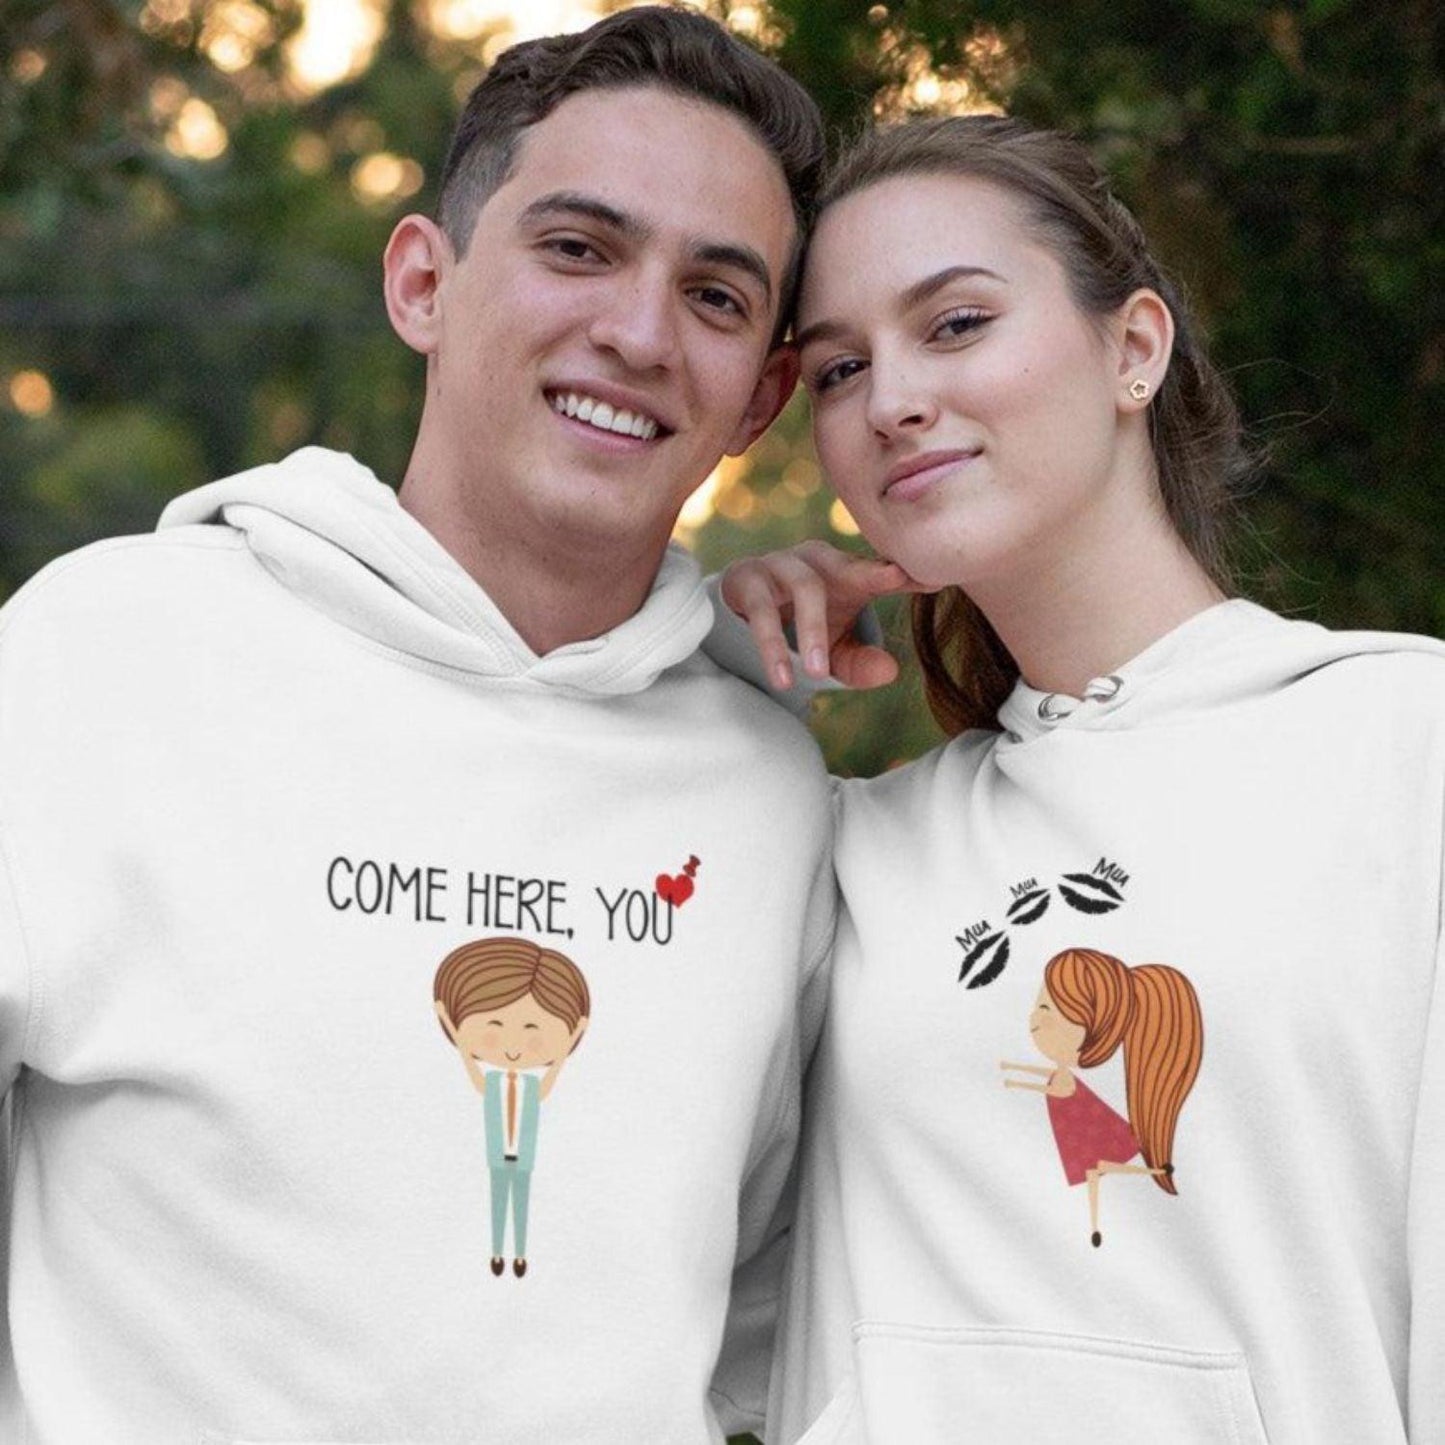 Matching Set: Cute Couple Gifts, Lovey Dovey Outfits, Wedding Gifts - 4Lovebirds